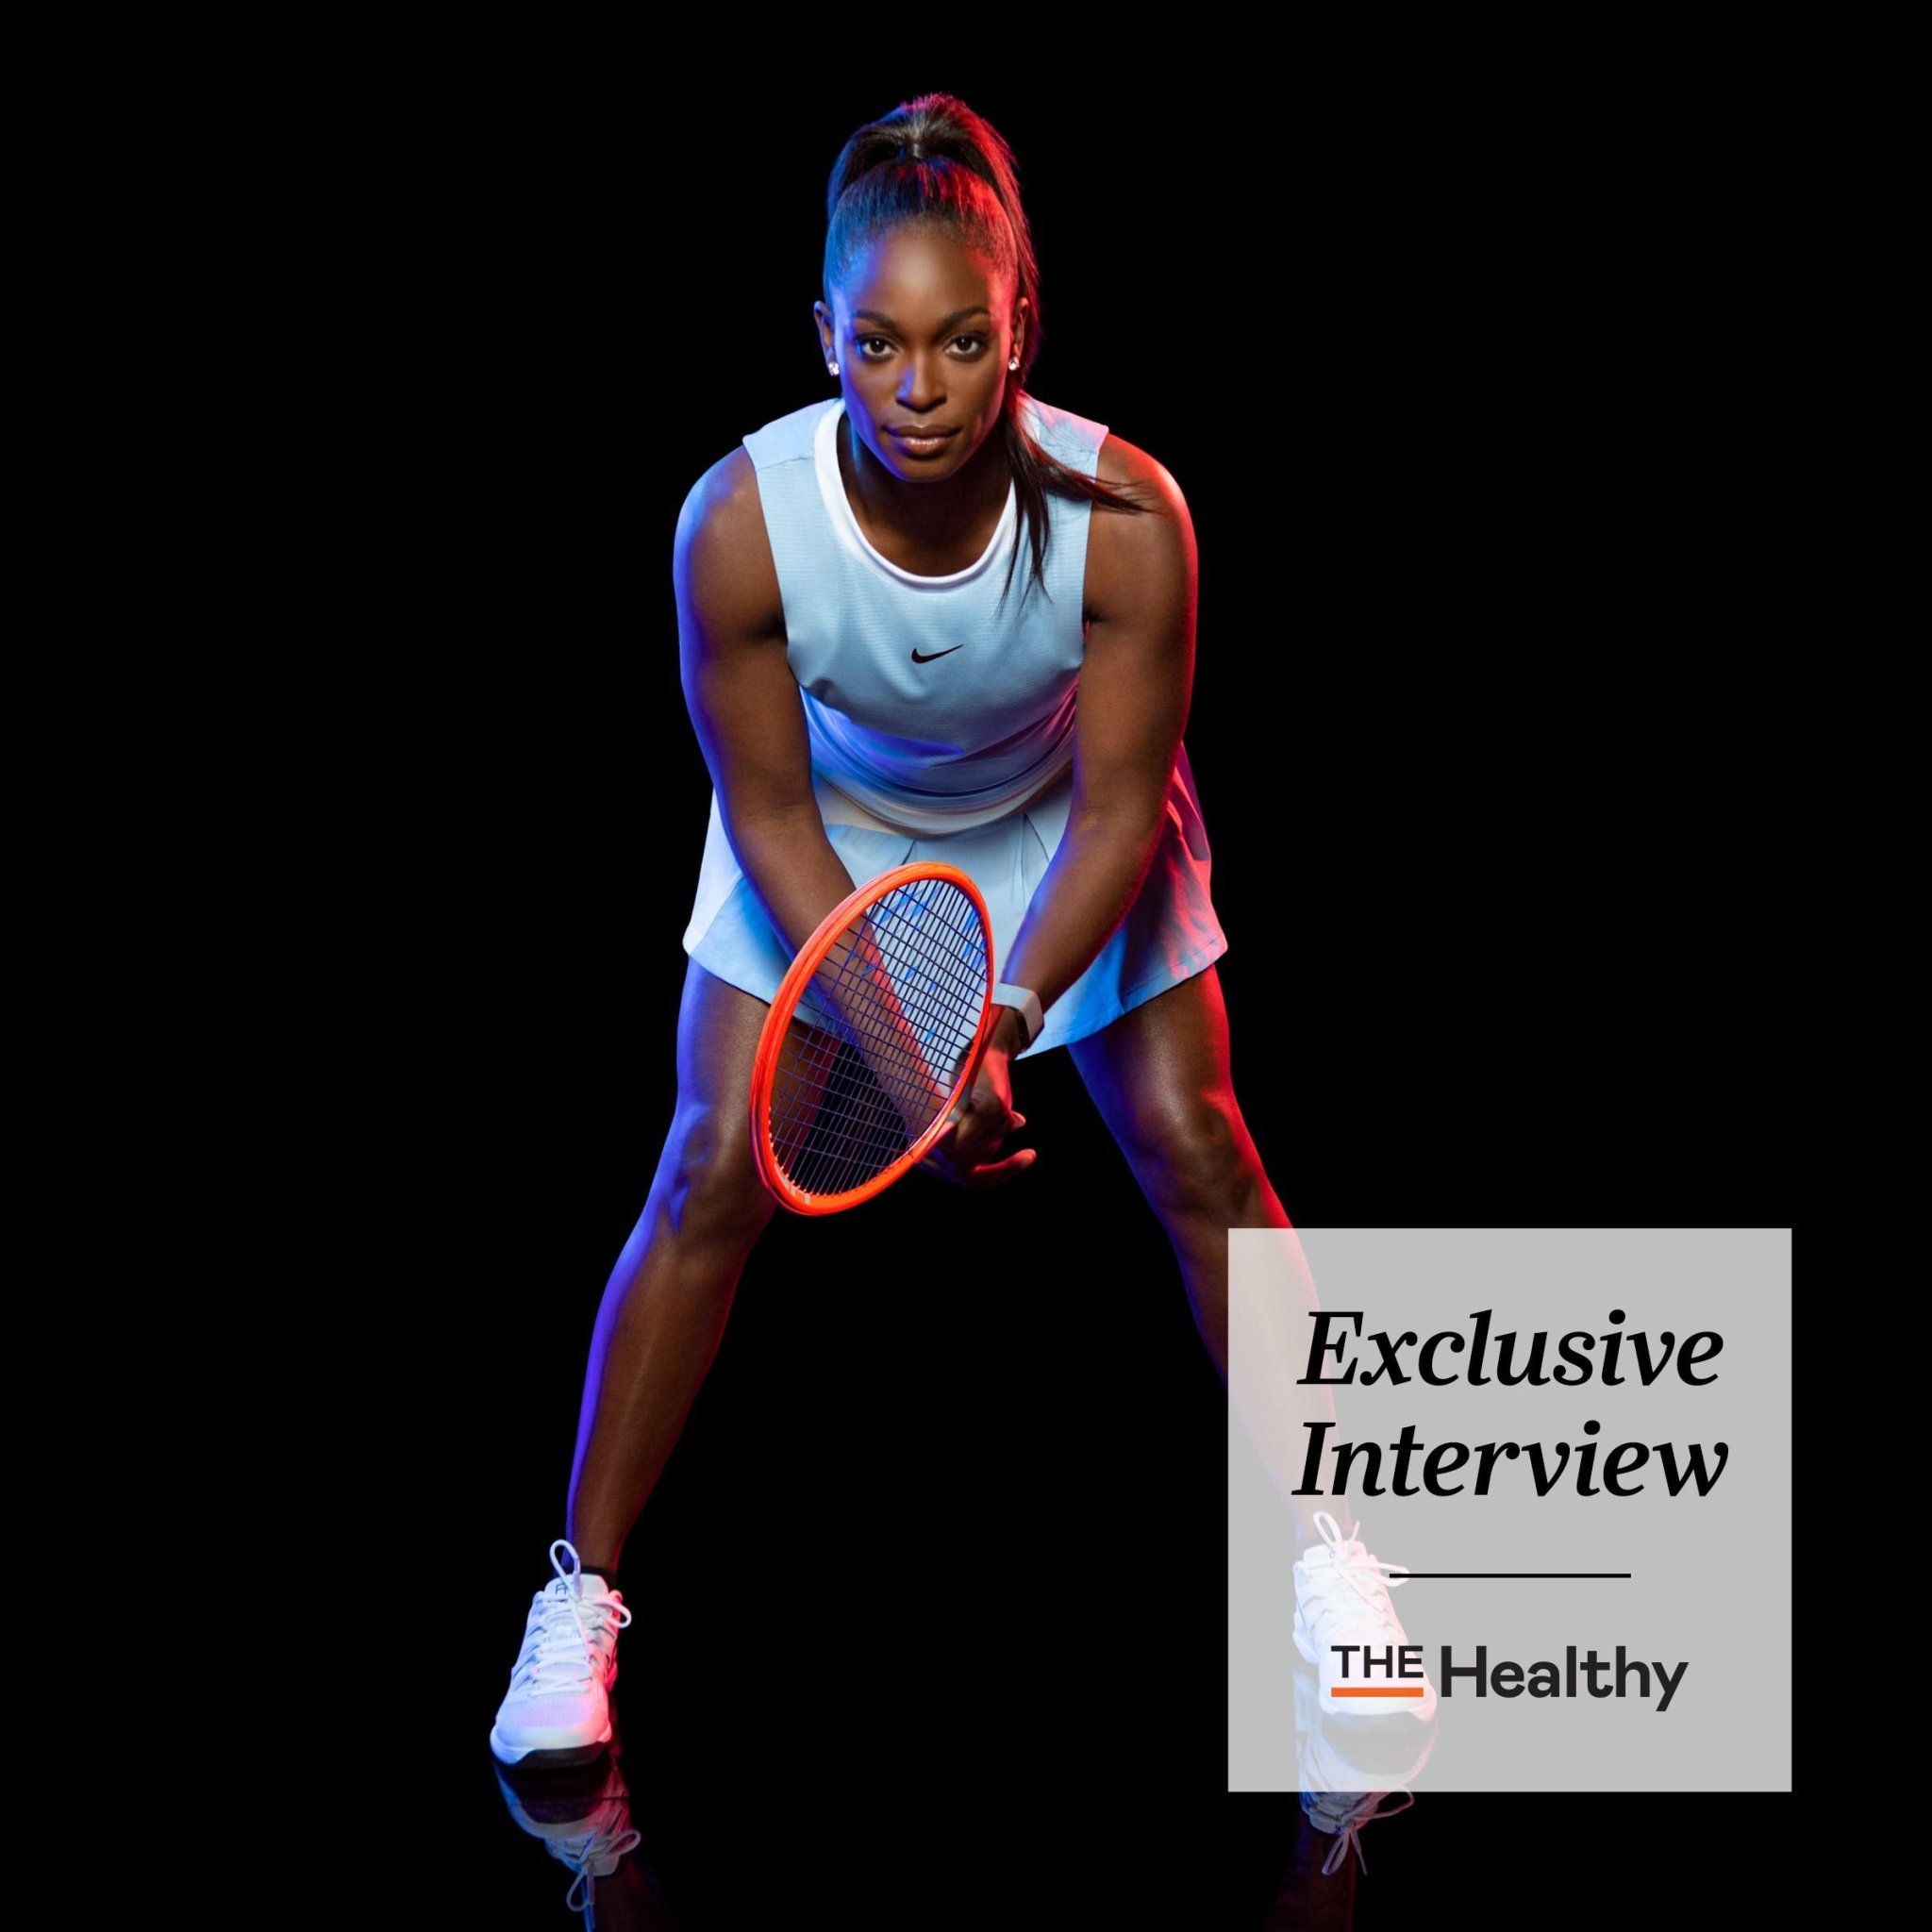 Tennis Pro Sloane Stephens on Staying Positive When You Feel Powerless